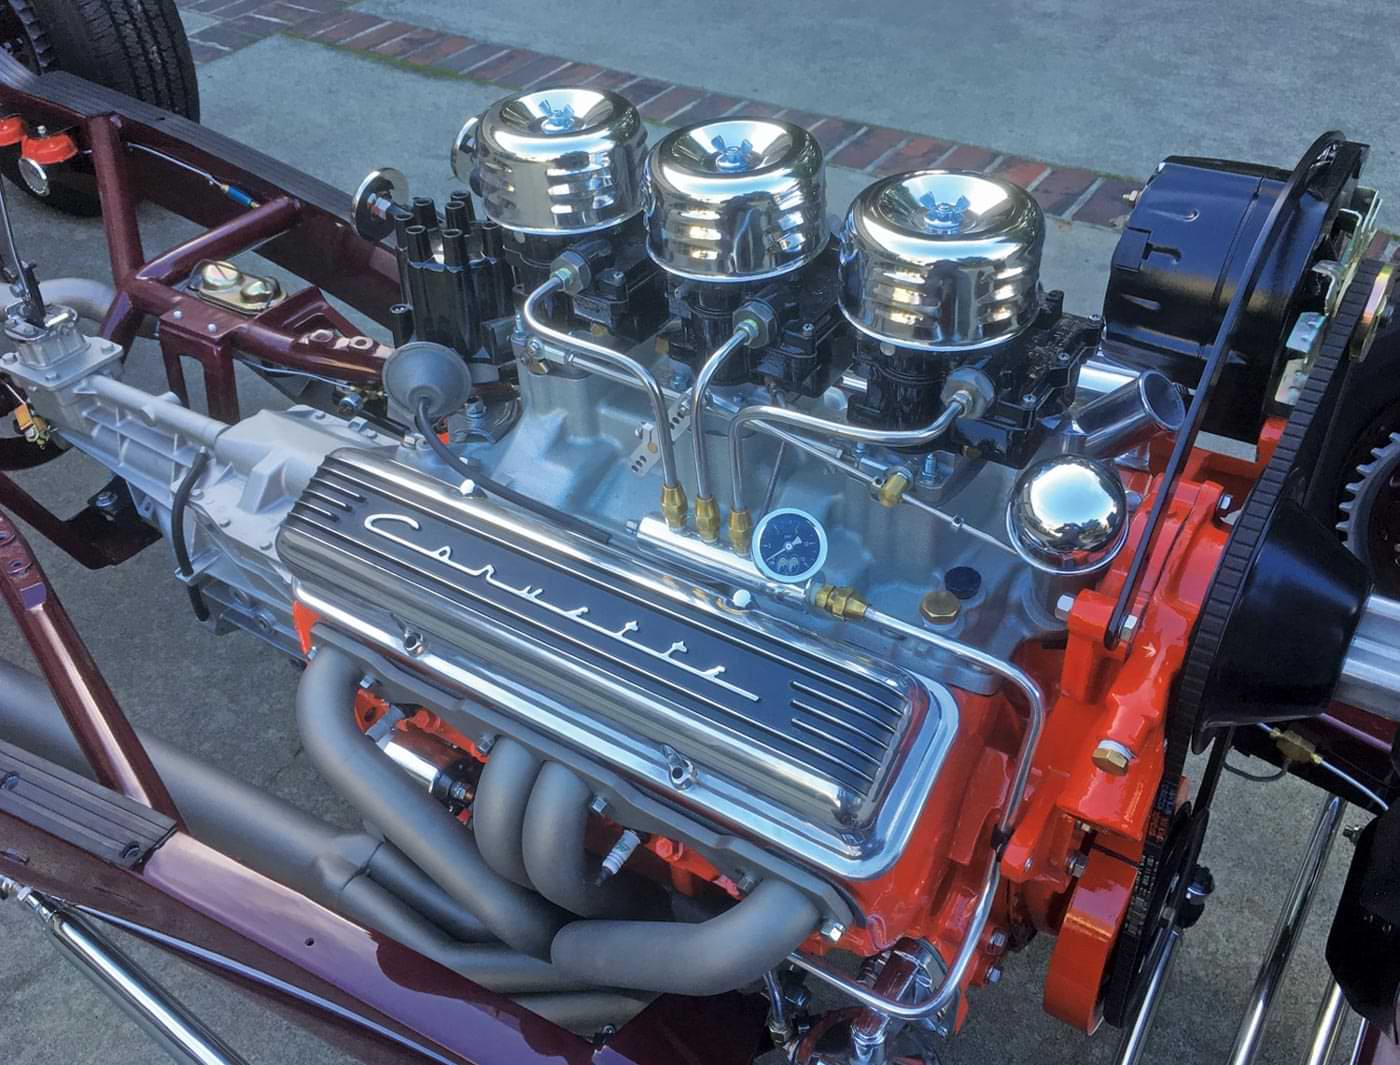 the engine displaying a 283 bored over 0.030 with camel-hump heads, a Thumpr from Comp Cams, an Offenhauser intake hold and a Zips water pump riser